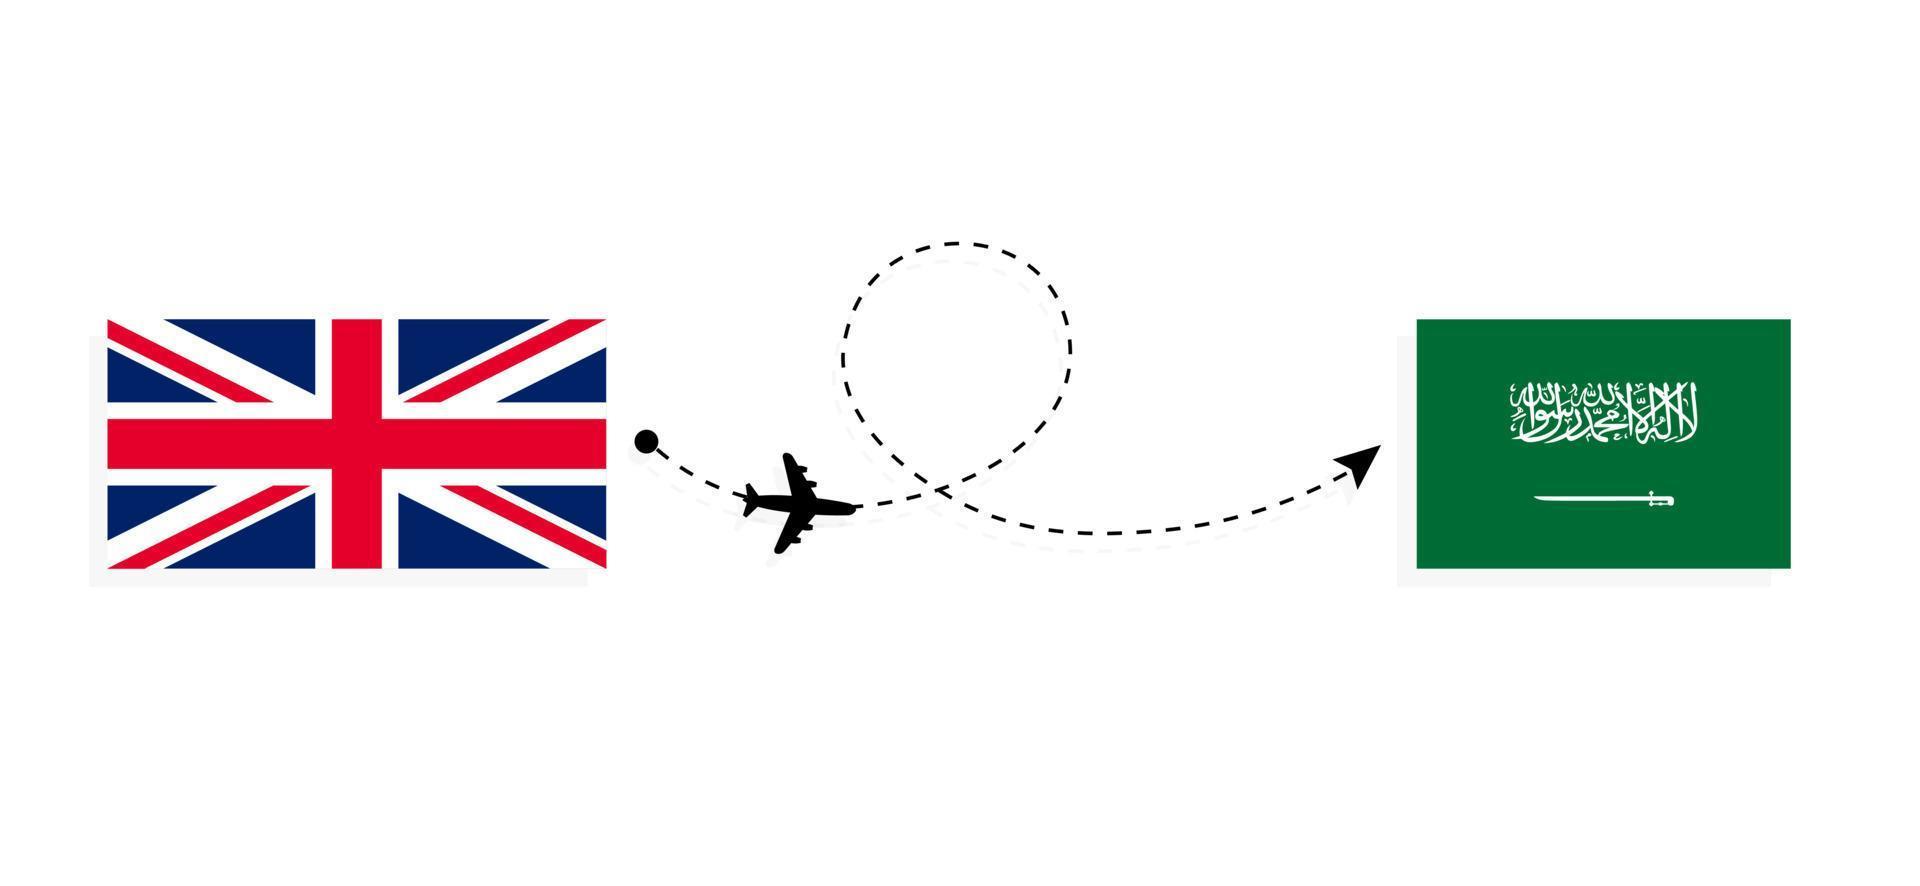 Flight and travel from United Kingdom of Great Britain to Saudi Arabia by passenger airplane Travel concept vector